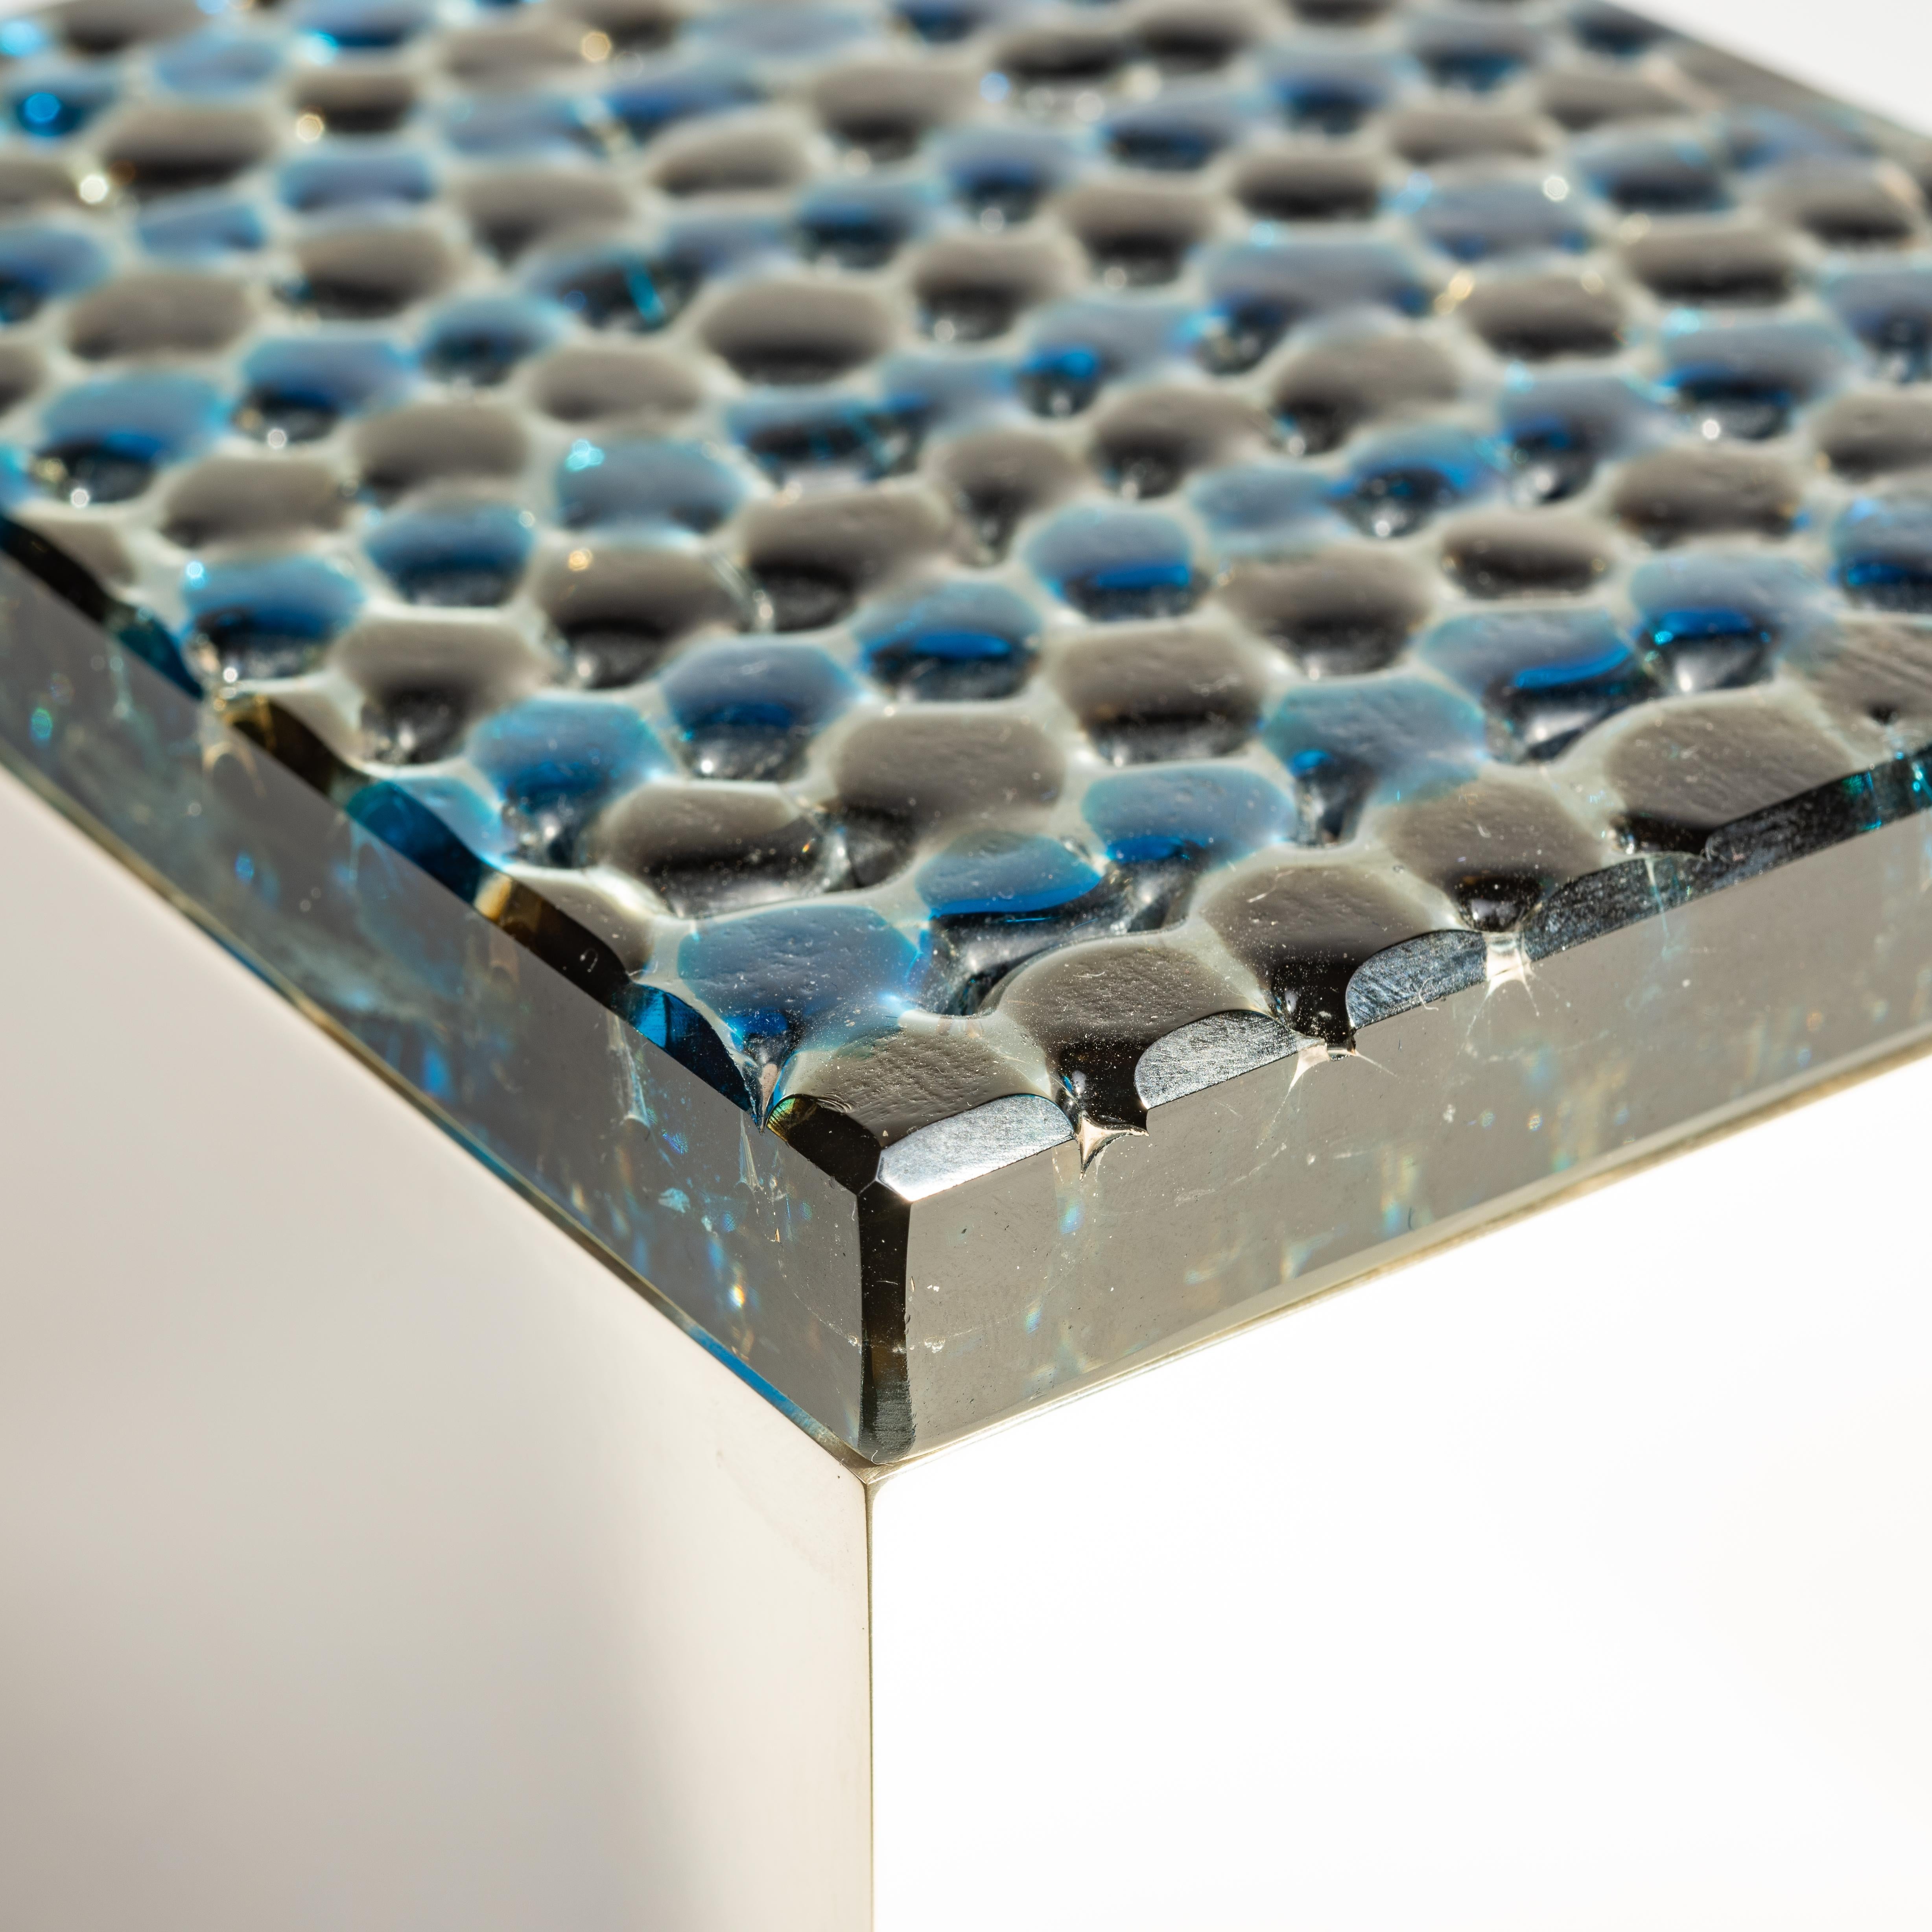 This vibrant blue and grayish green murine box seemingly holds the liquid tension of colors about to blend into one another, suspended in glass. Murrine or vetro mosaico is cut from a pre-prepared glass cane, whose pattern is created by the careful